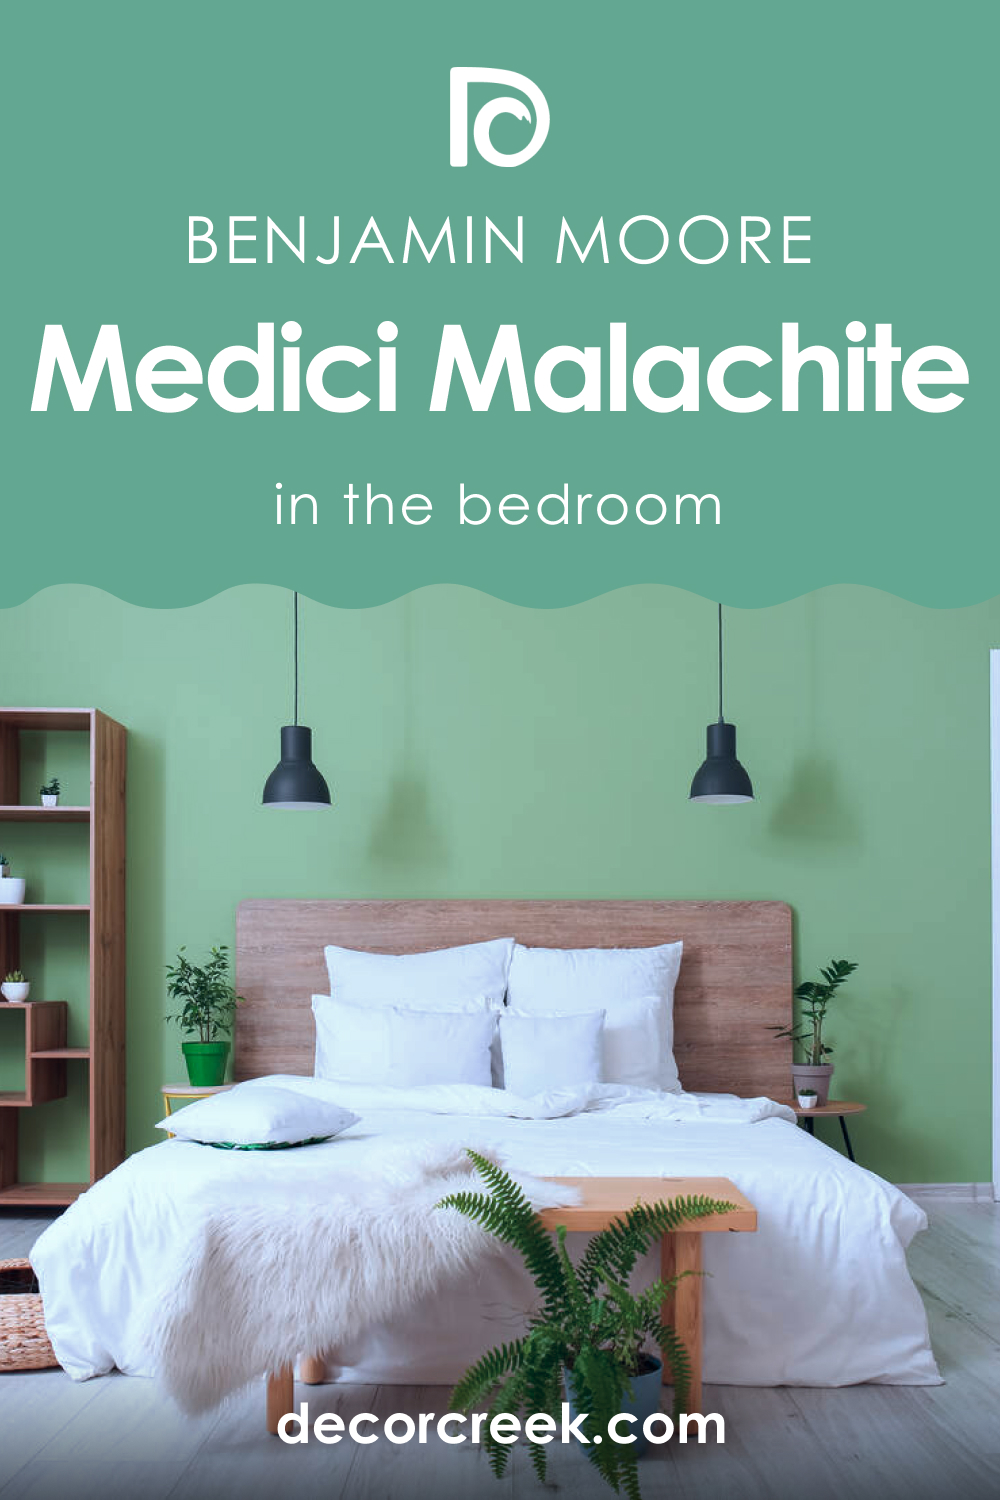 How to Use Medici Malachite 600 in the Bedroom?